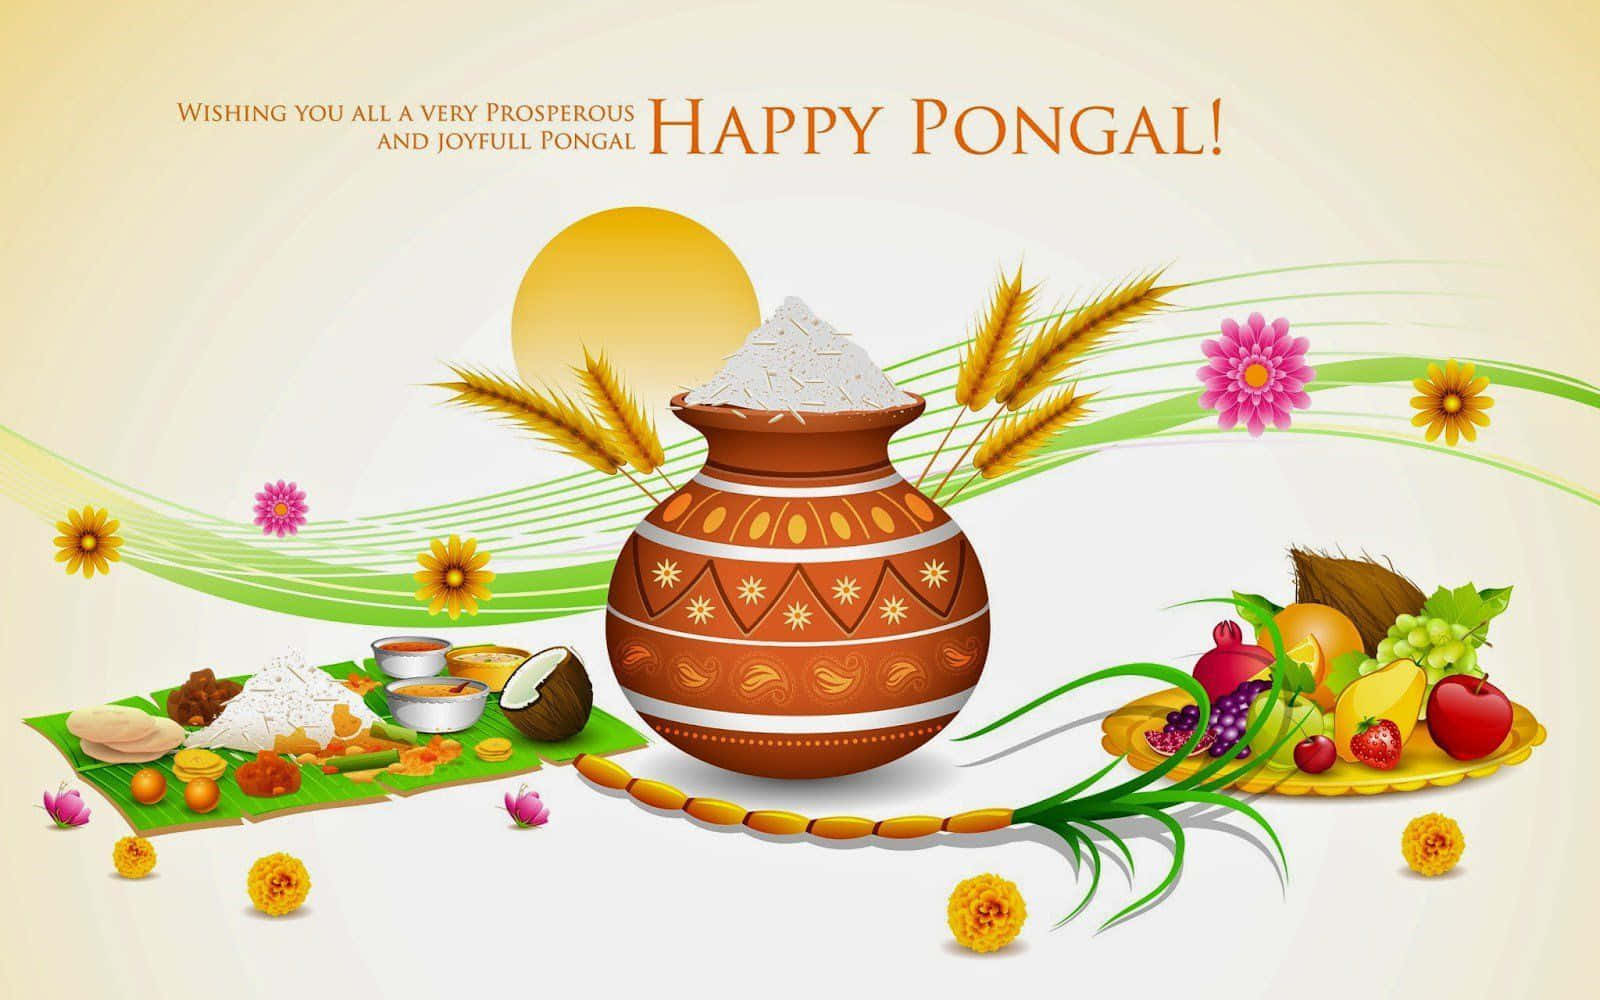 Download Celebrate Pongal with friends and family | Wallpapers.com